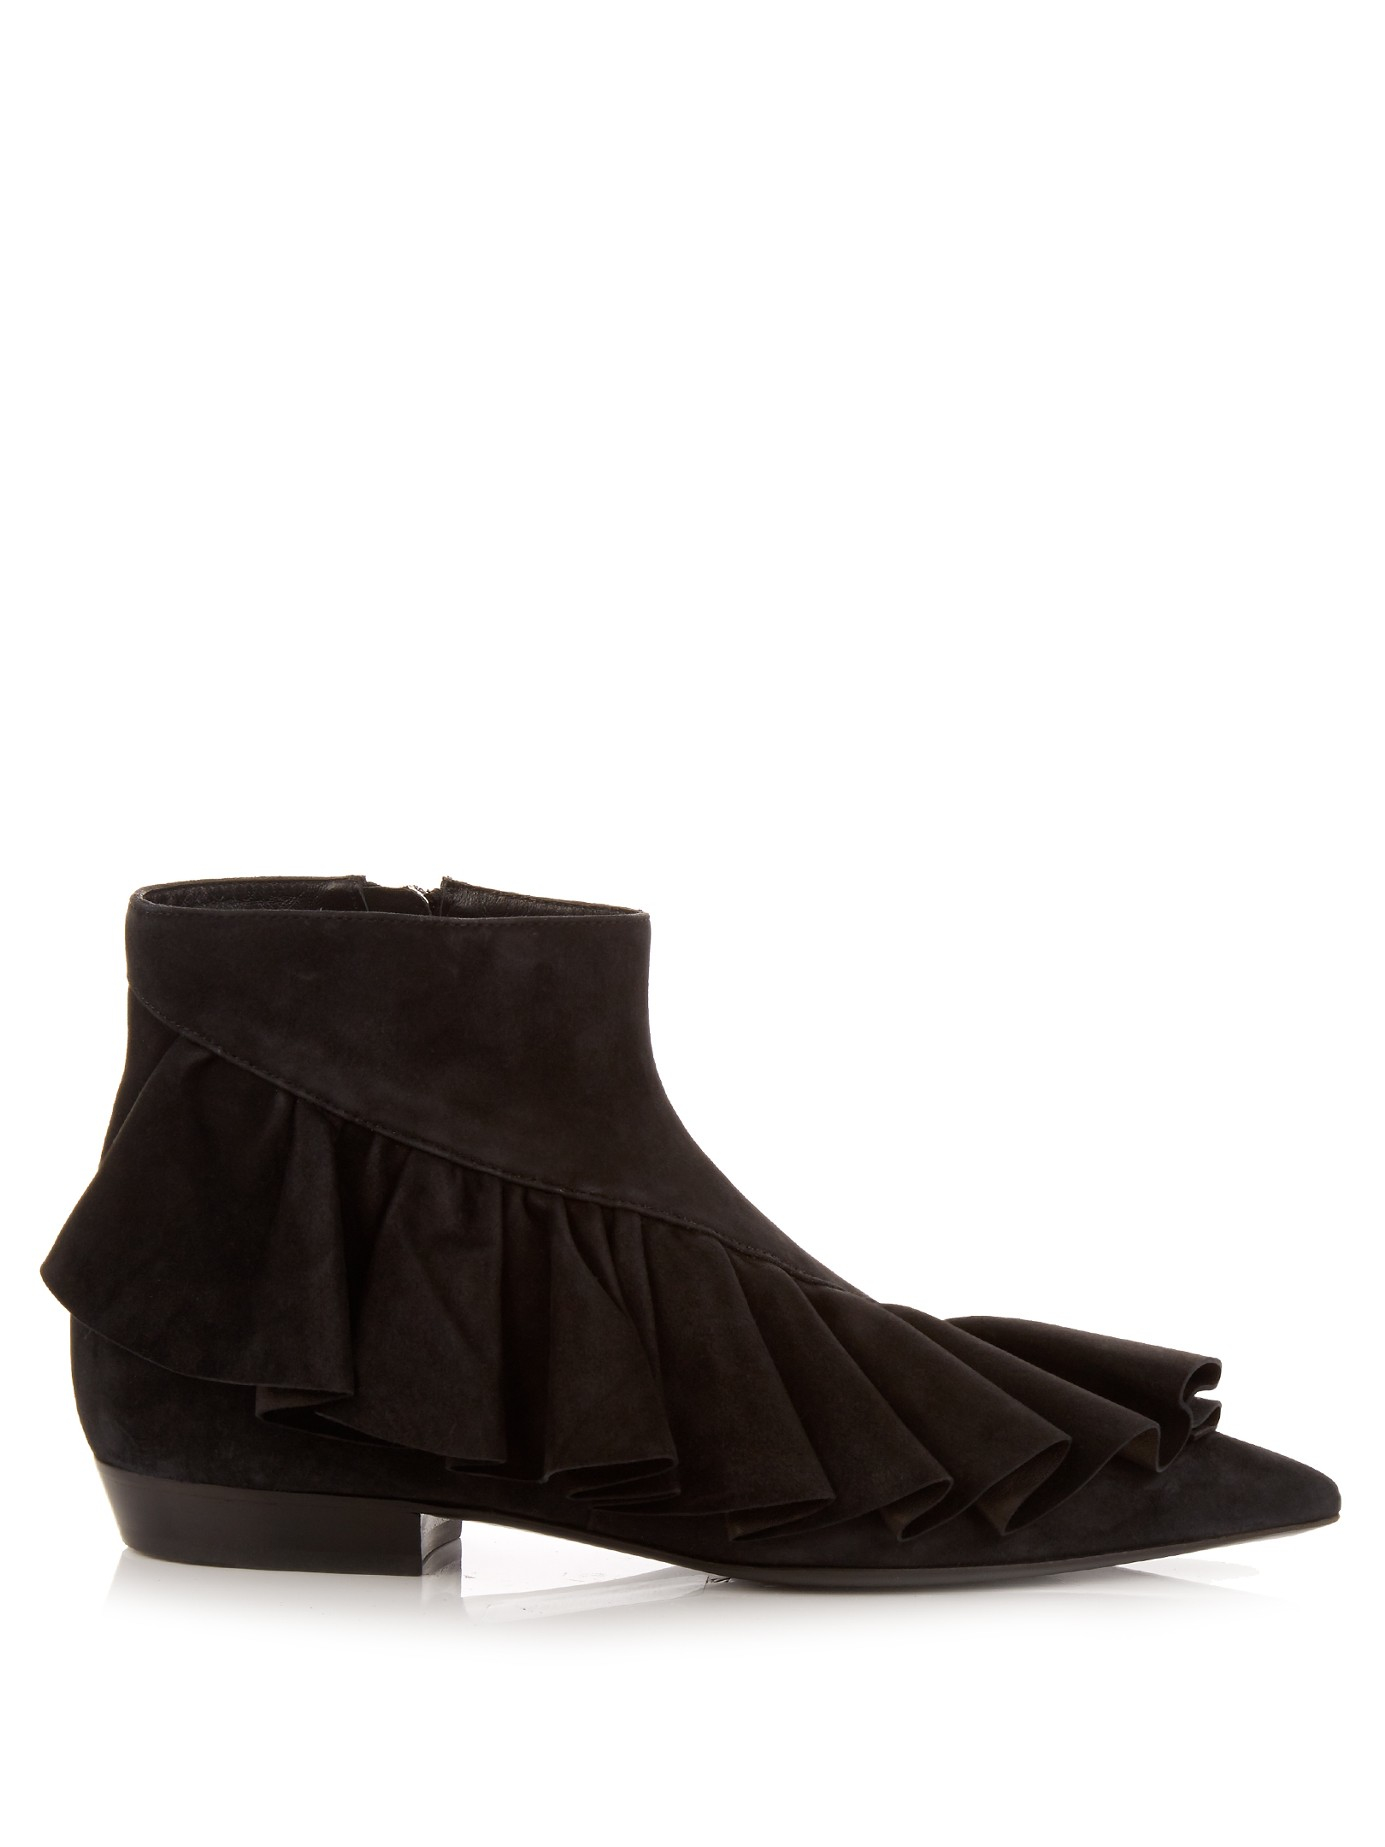 J.w. anderson Ruffled Suede Ankle Boots in Black | Lyst